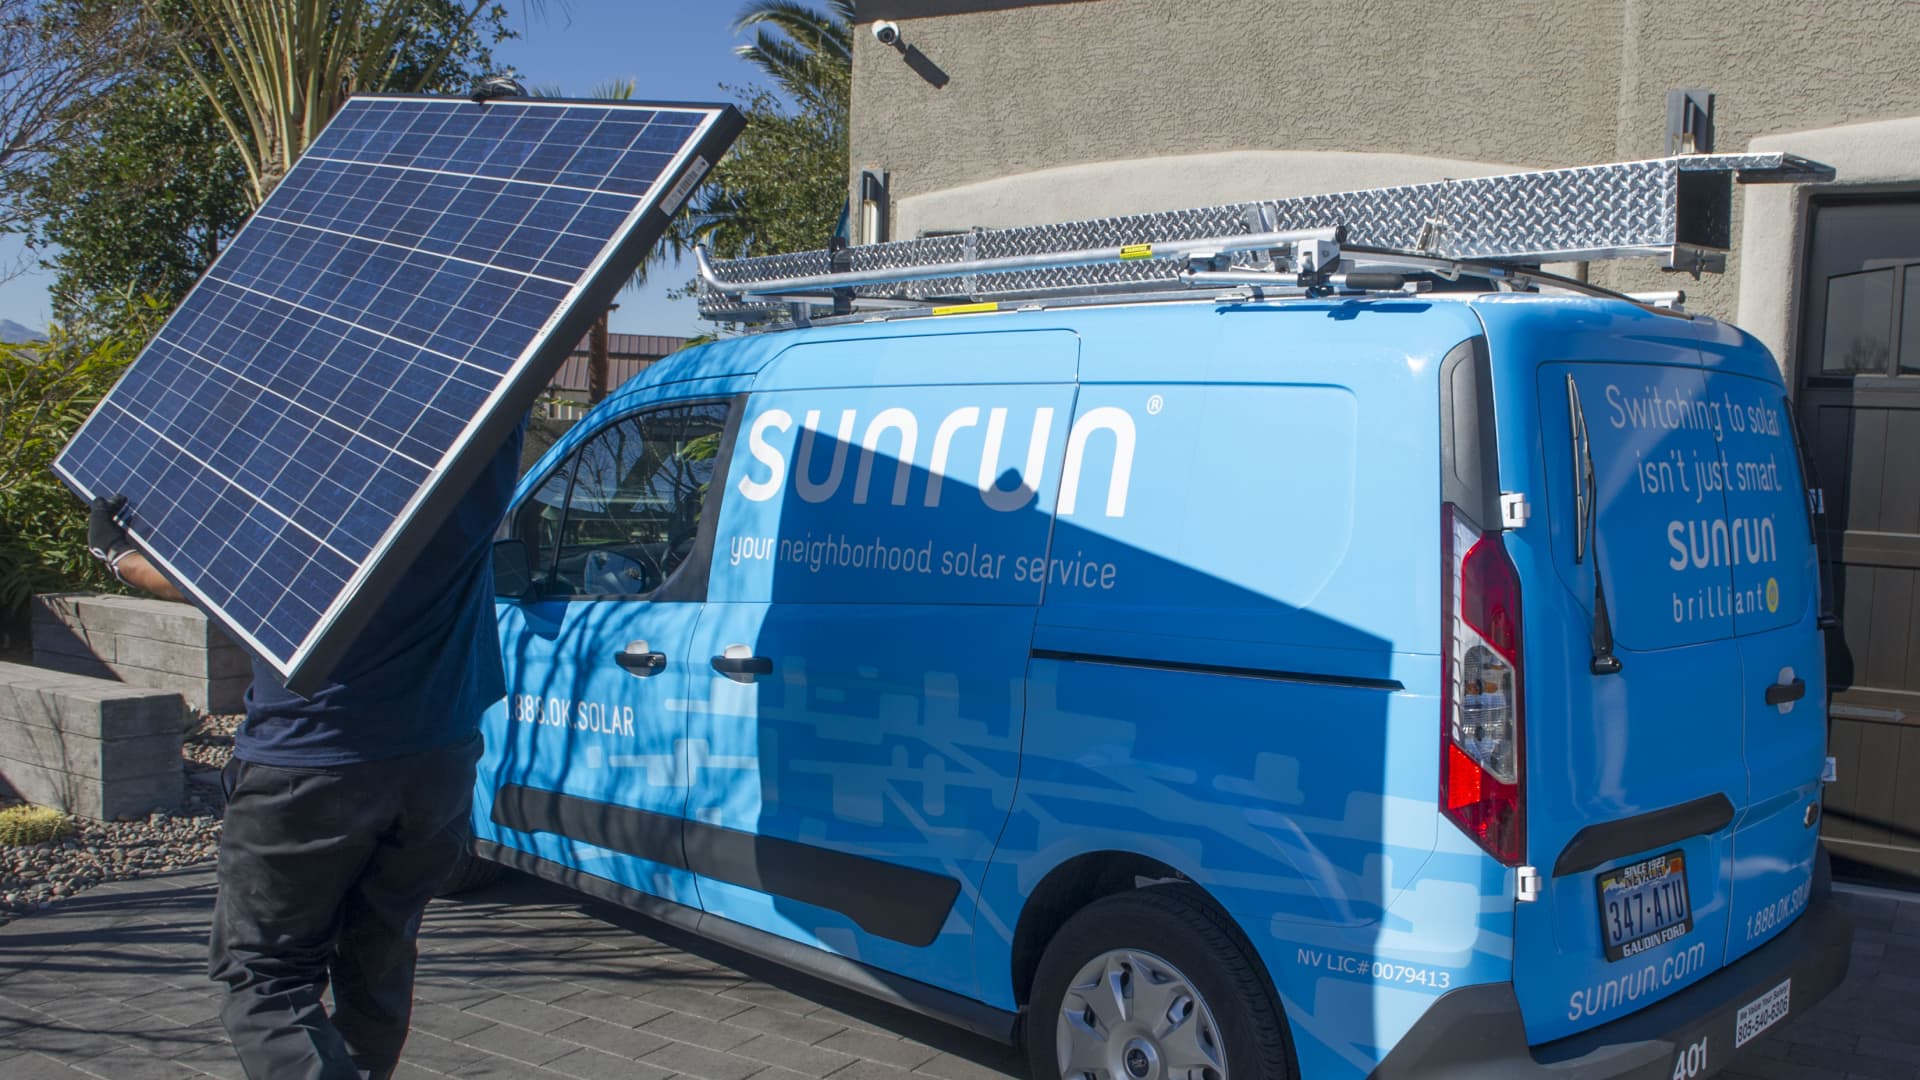 Sunrun could surge 45% if lawmakers approve climate spending boost, Barclays says